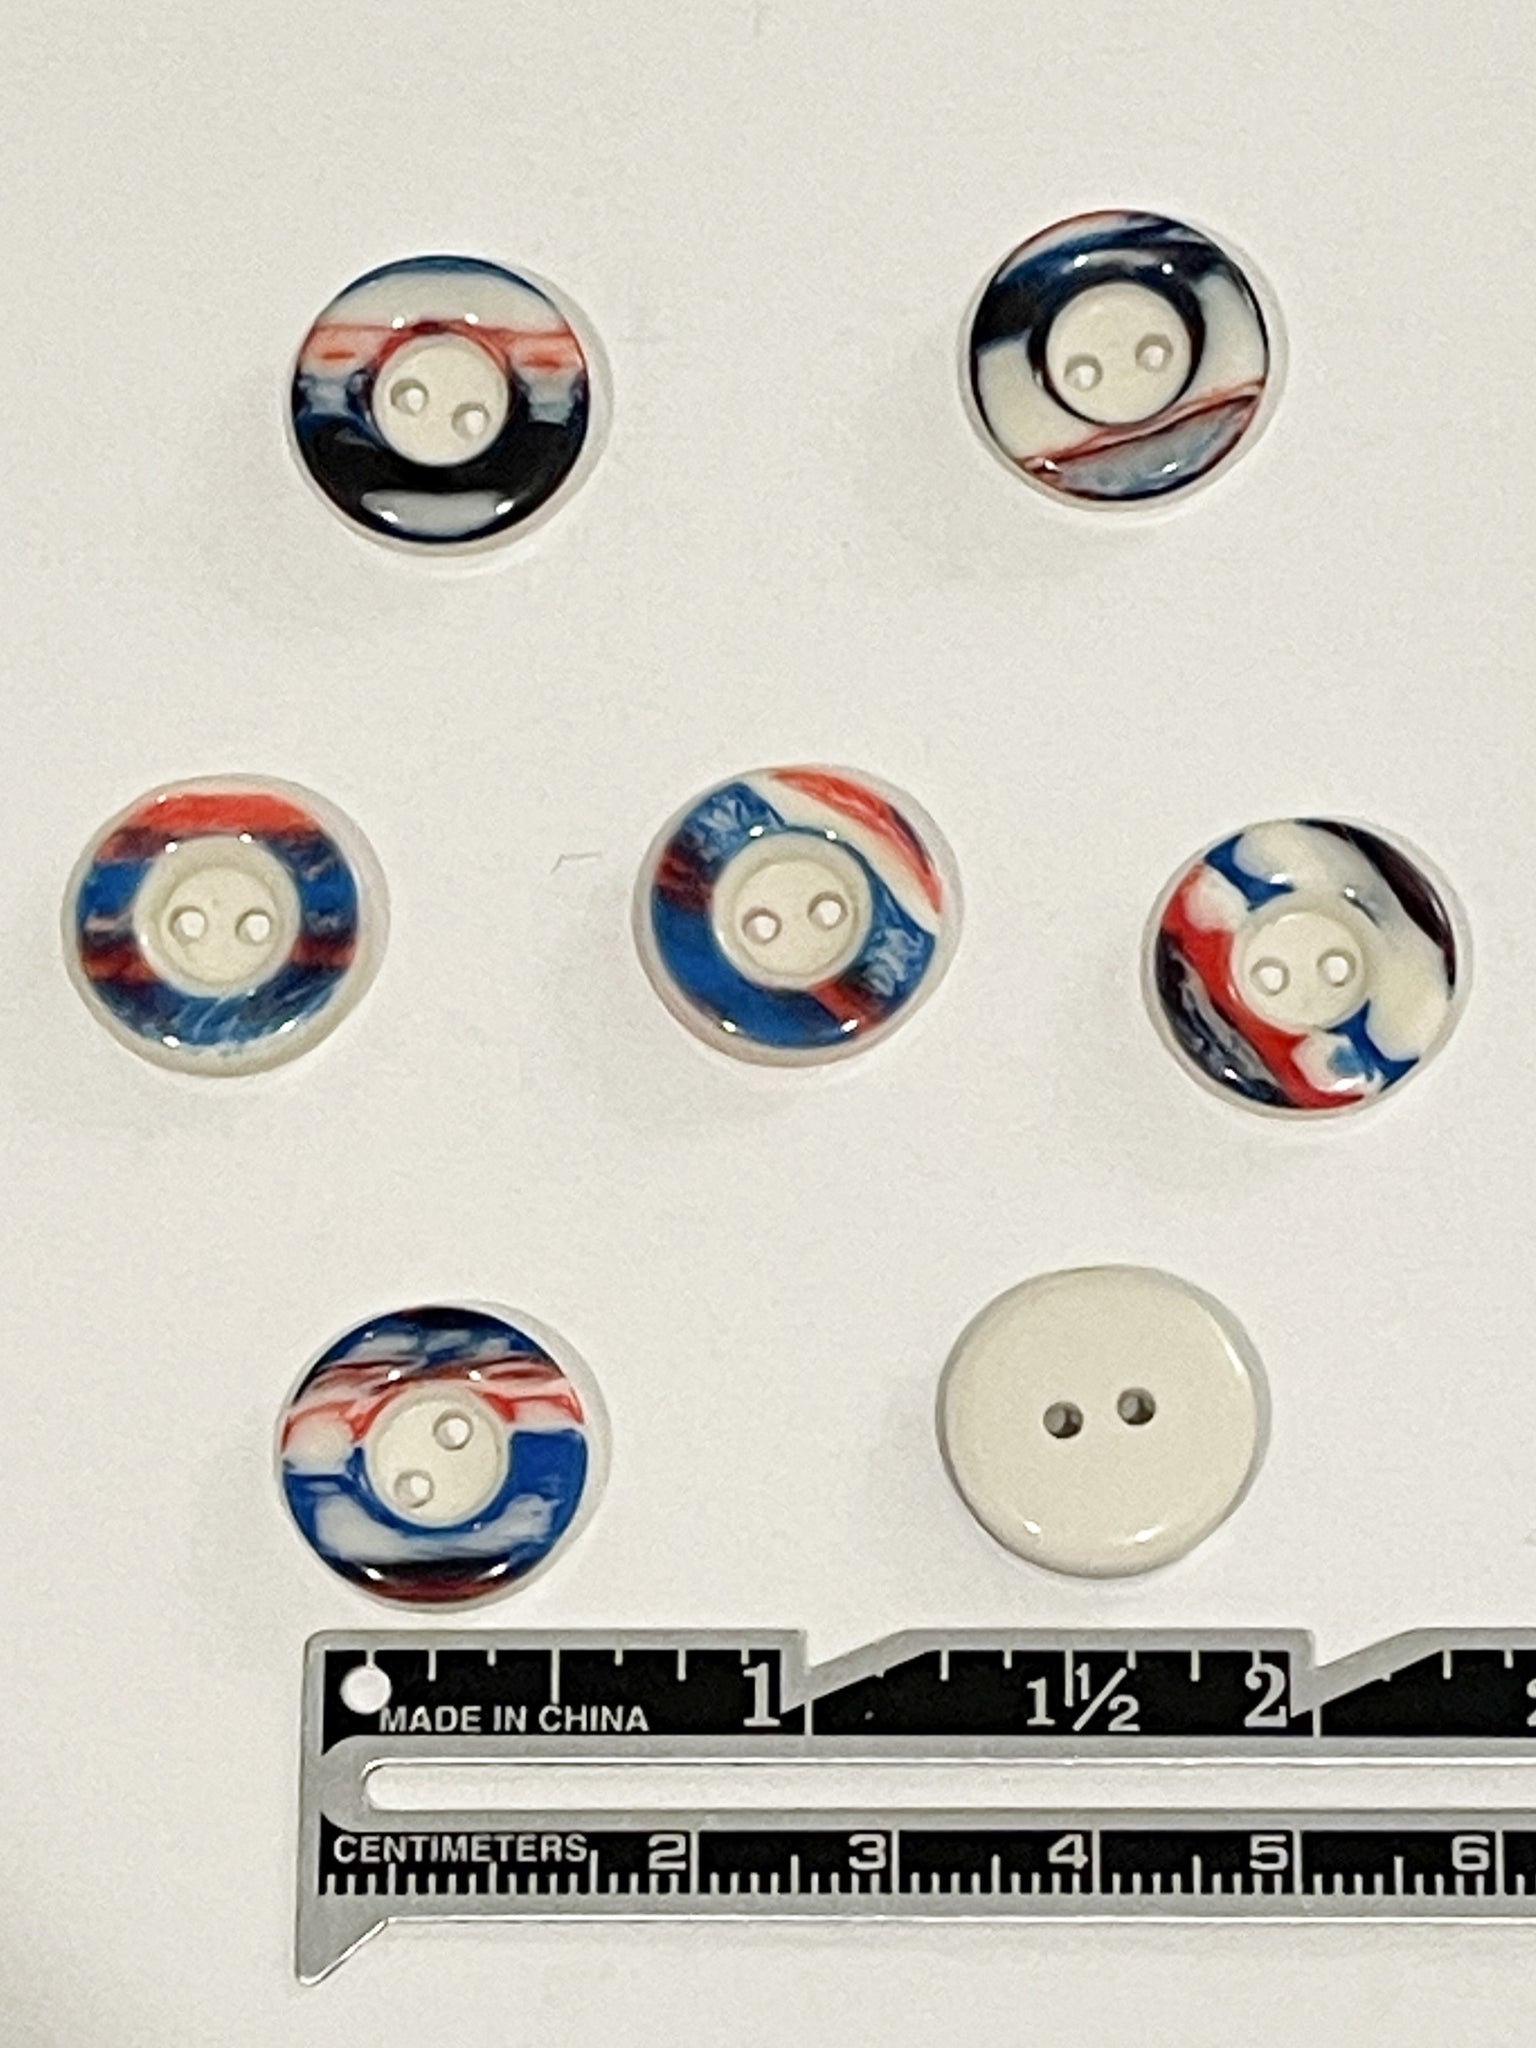 Buttons Plastic Set of 6 or 7 - White with Multi Colored Ring